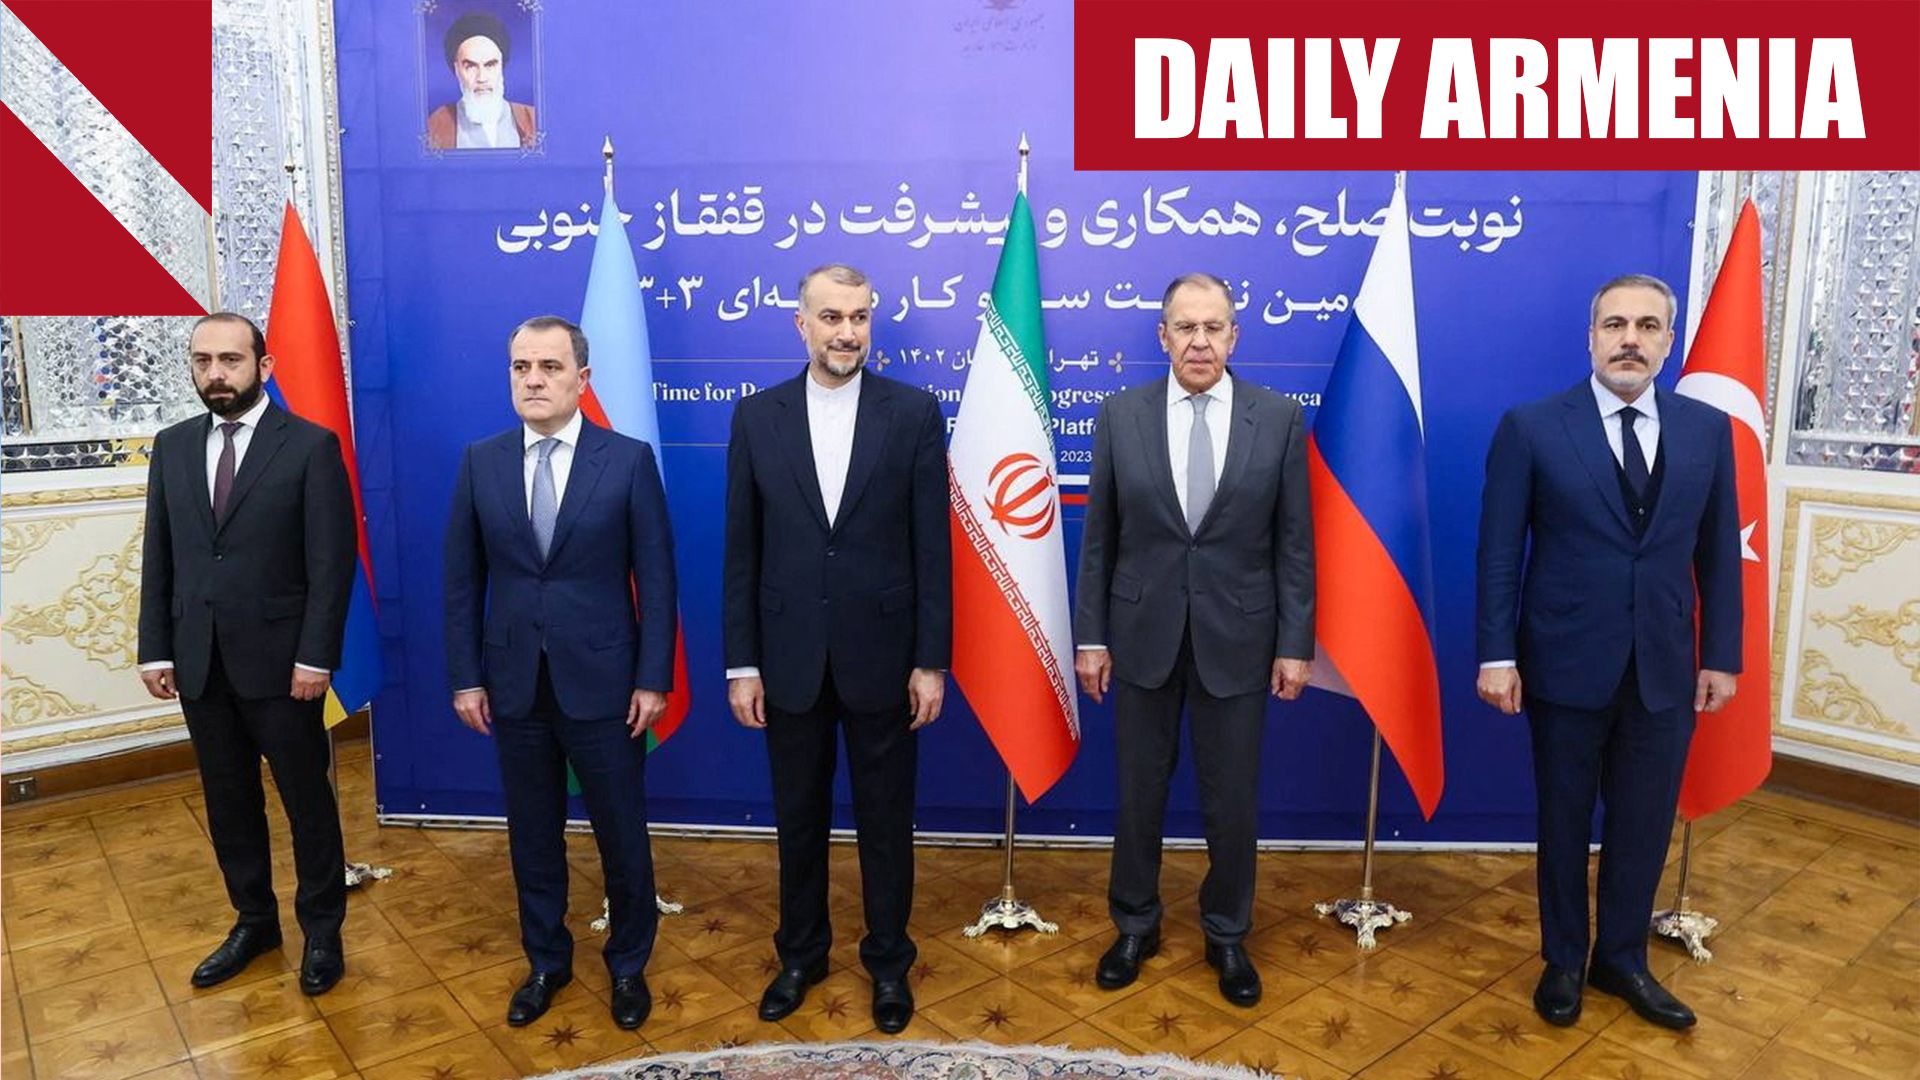 Top diplomats from Armenia and Turkey hold rare meeting in Iran